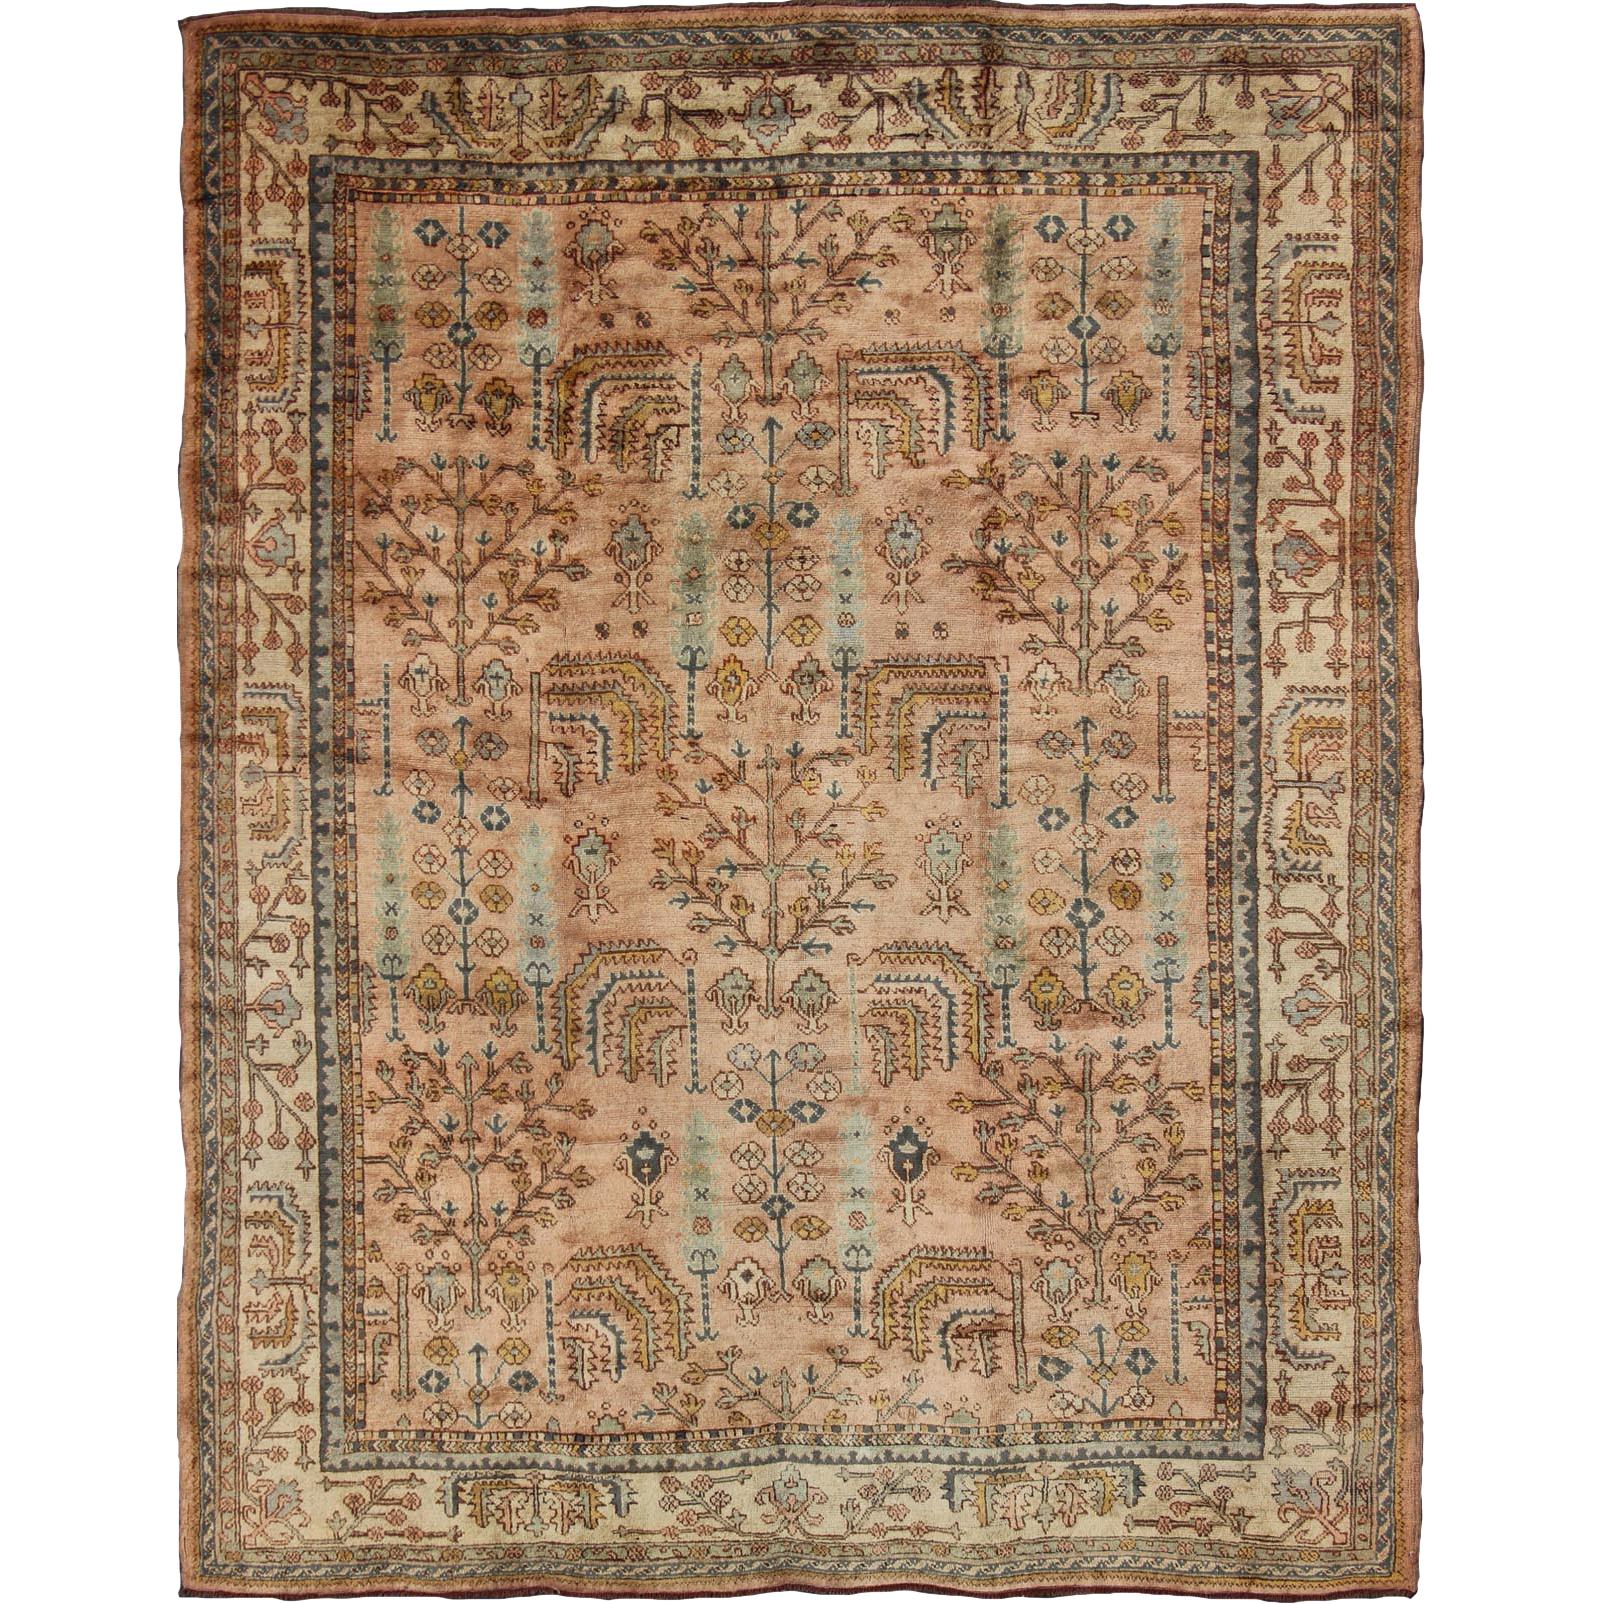 Turkish Oushak Antique Rug with Botanical Design in Salmon, Blue and Brown